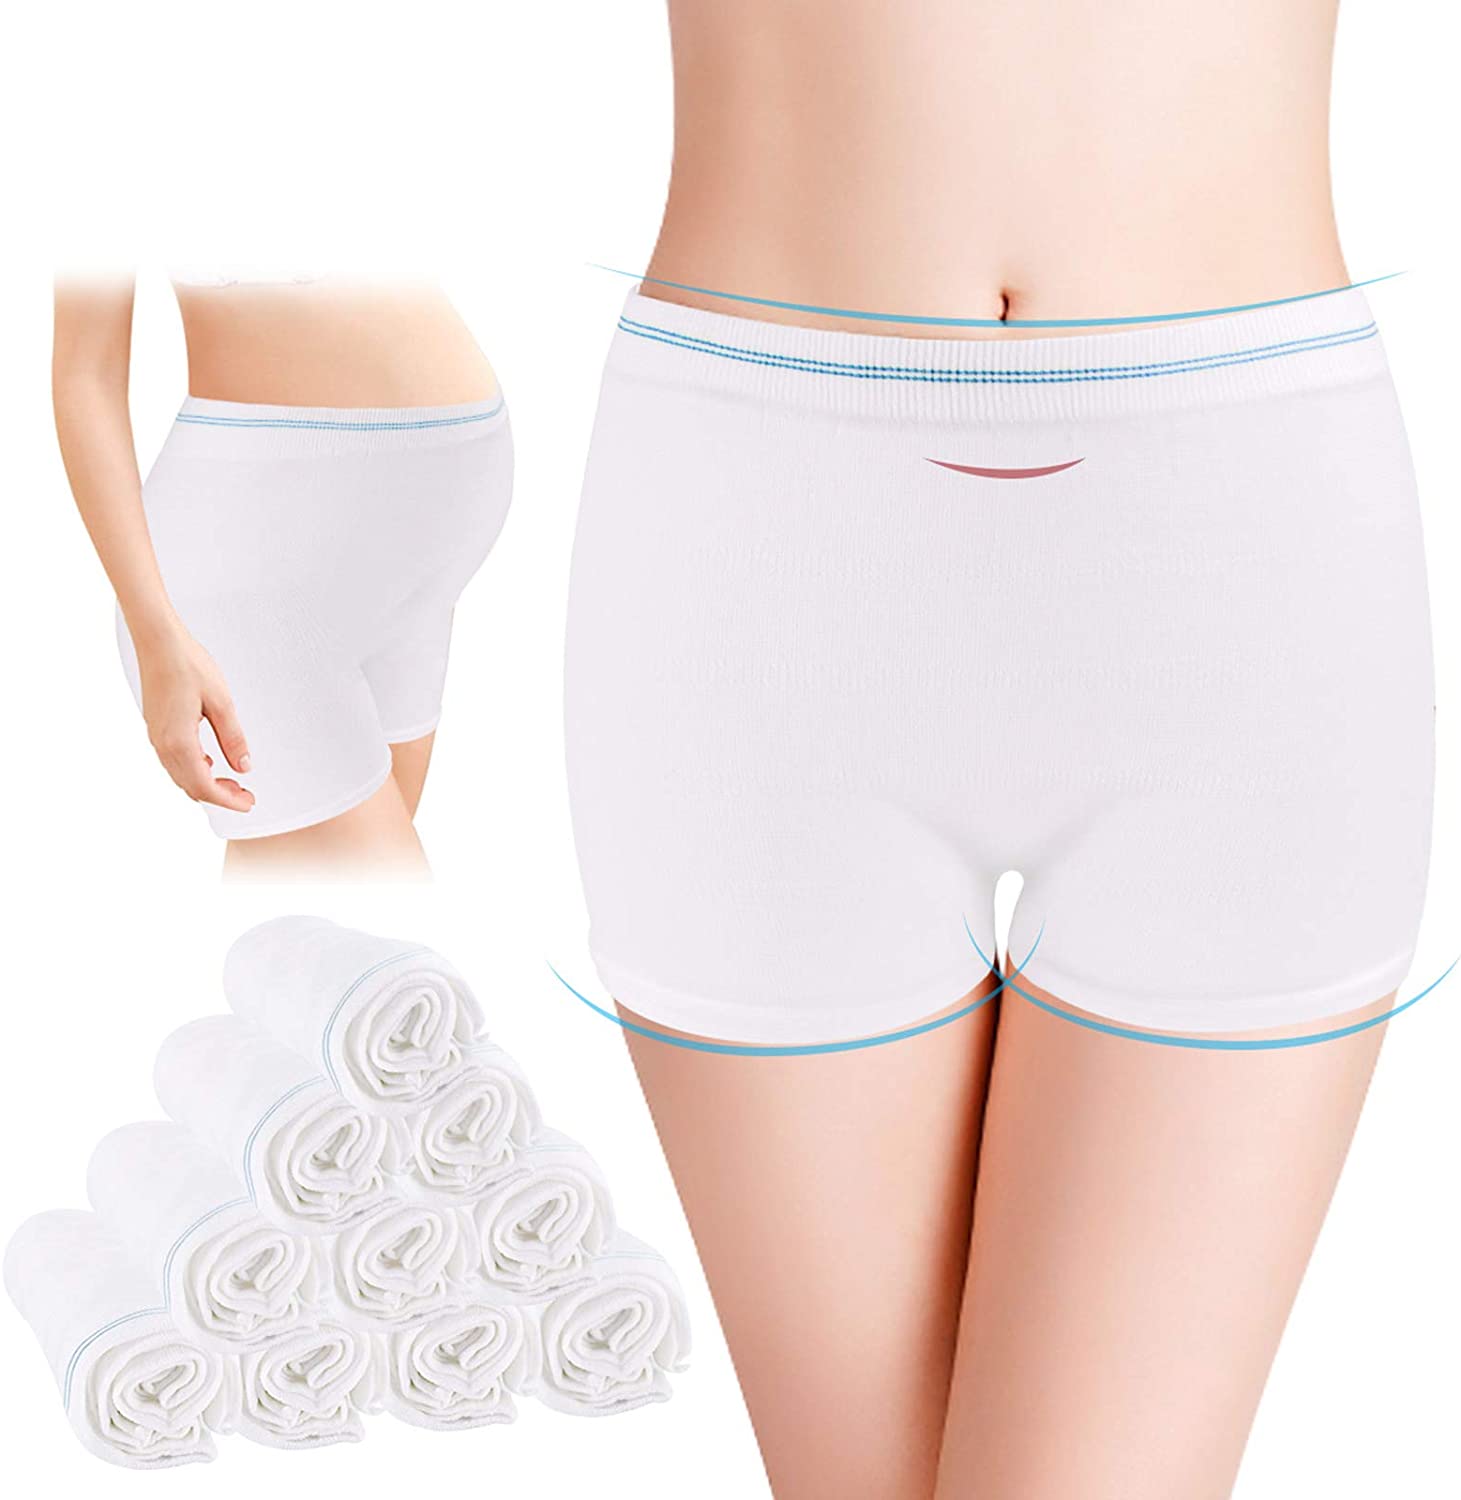 Maternity pad Panties, Disposables Postpartum Underwear Panties for Women  Hospital Provide Surgical Recovery,Incontinence, Maternity